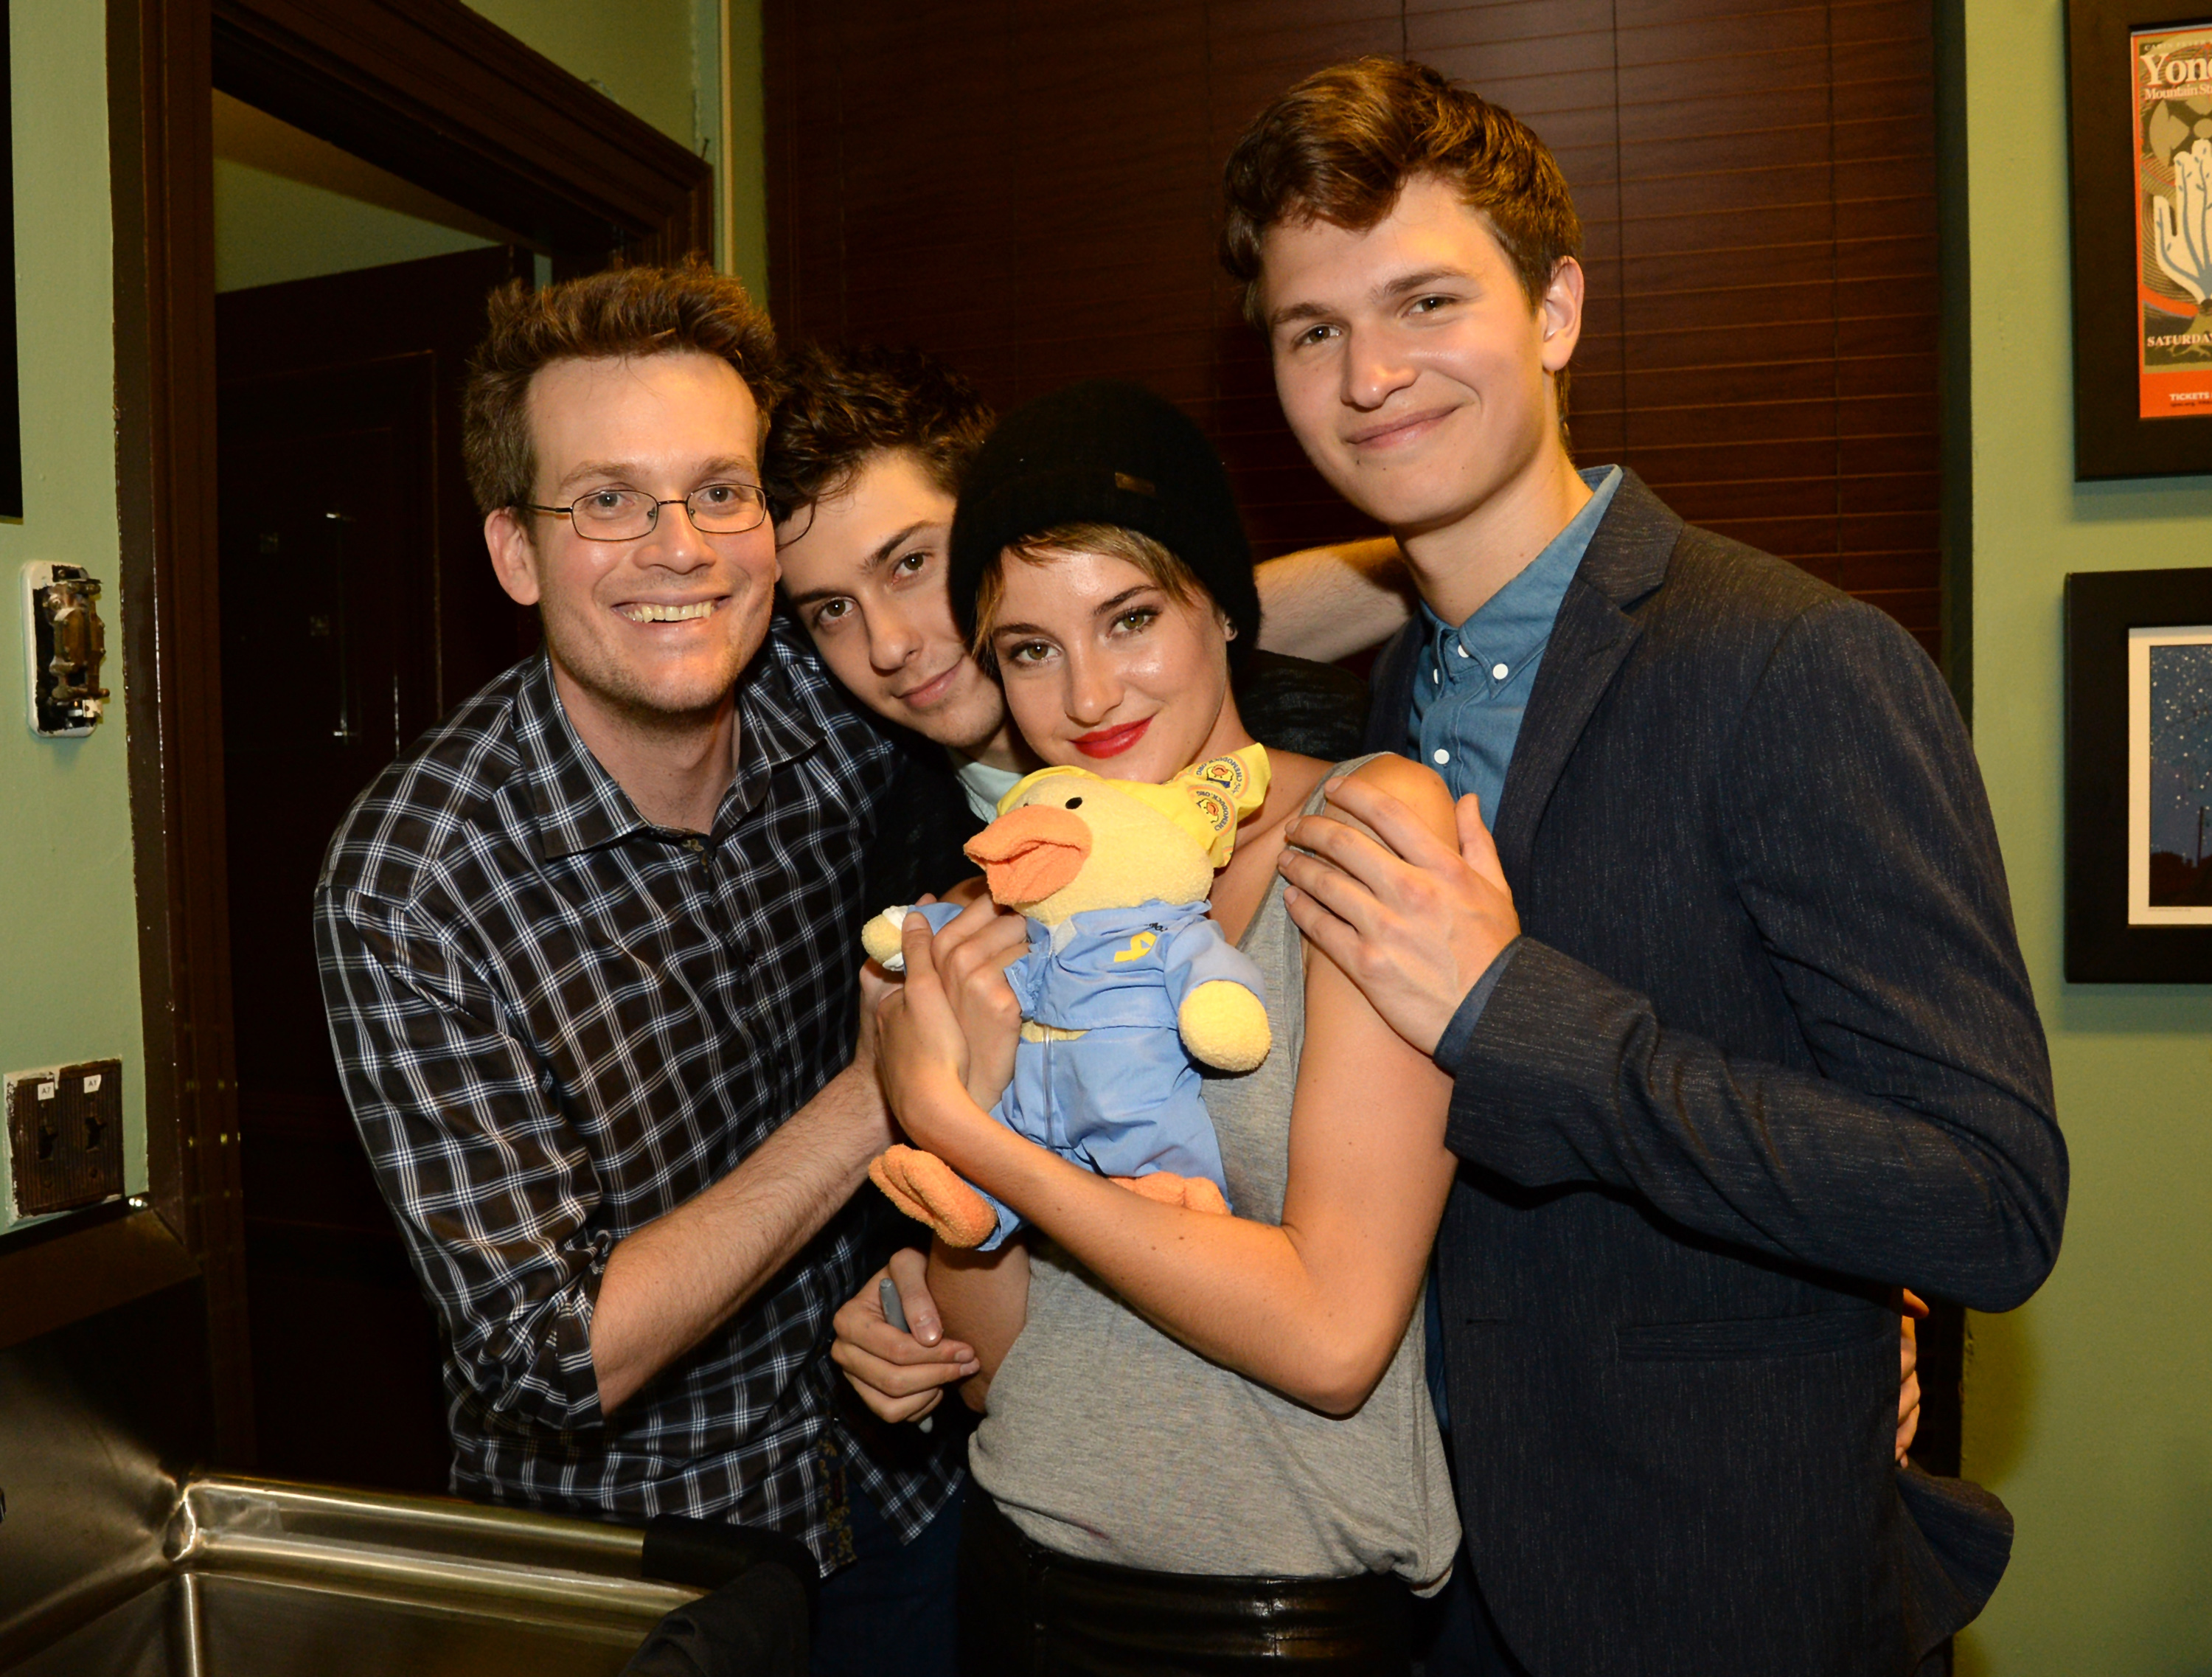 "The Fault In Our Stars" Nashville Red Carpet And Fan Event With Shailene Woodley, Ansel Elgort, Nat Wolff And John Green